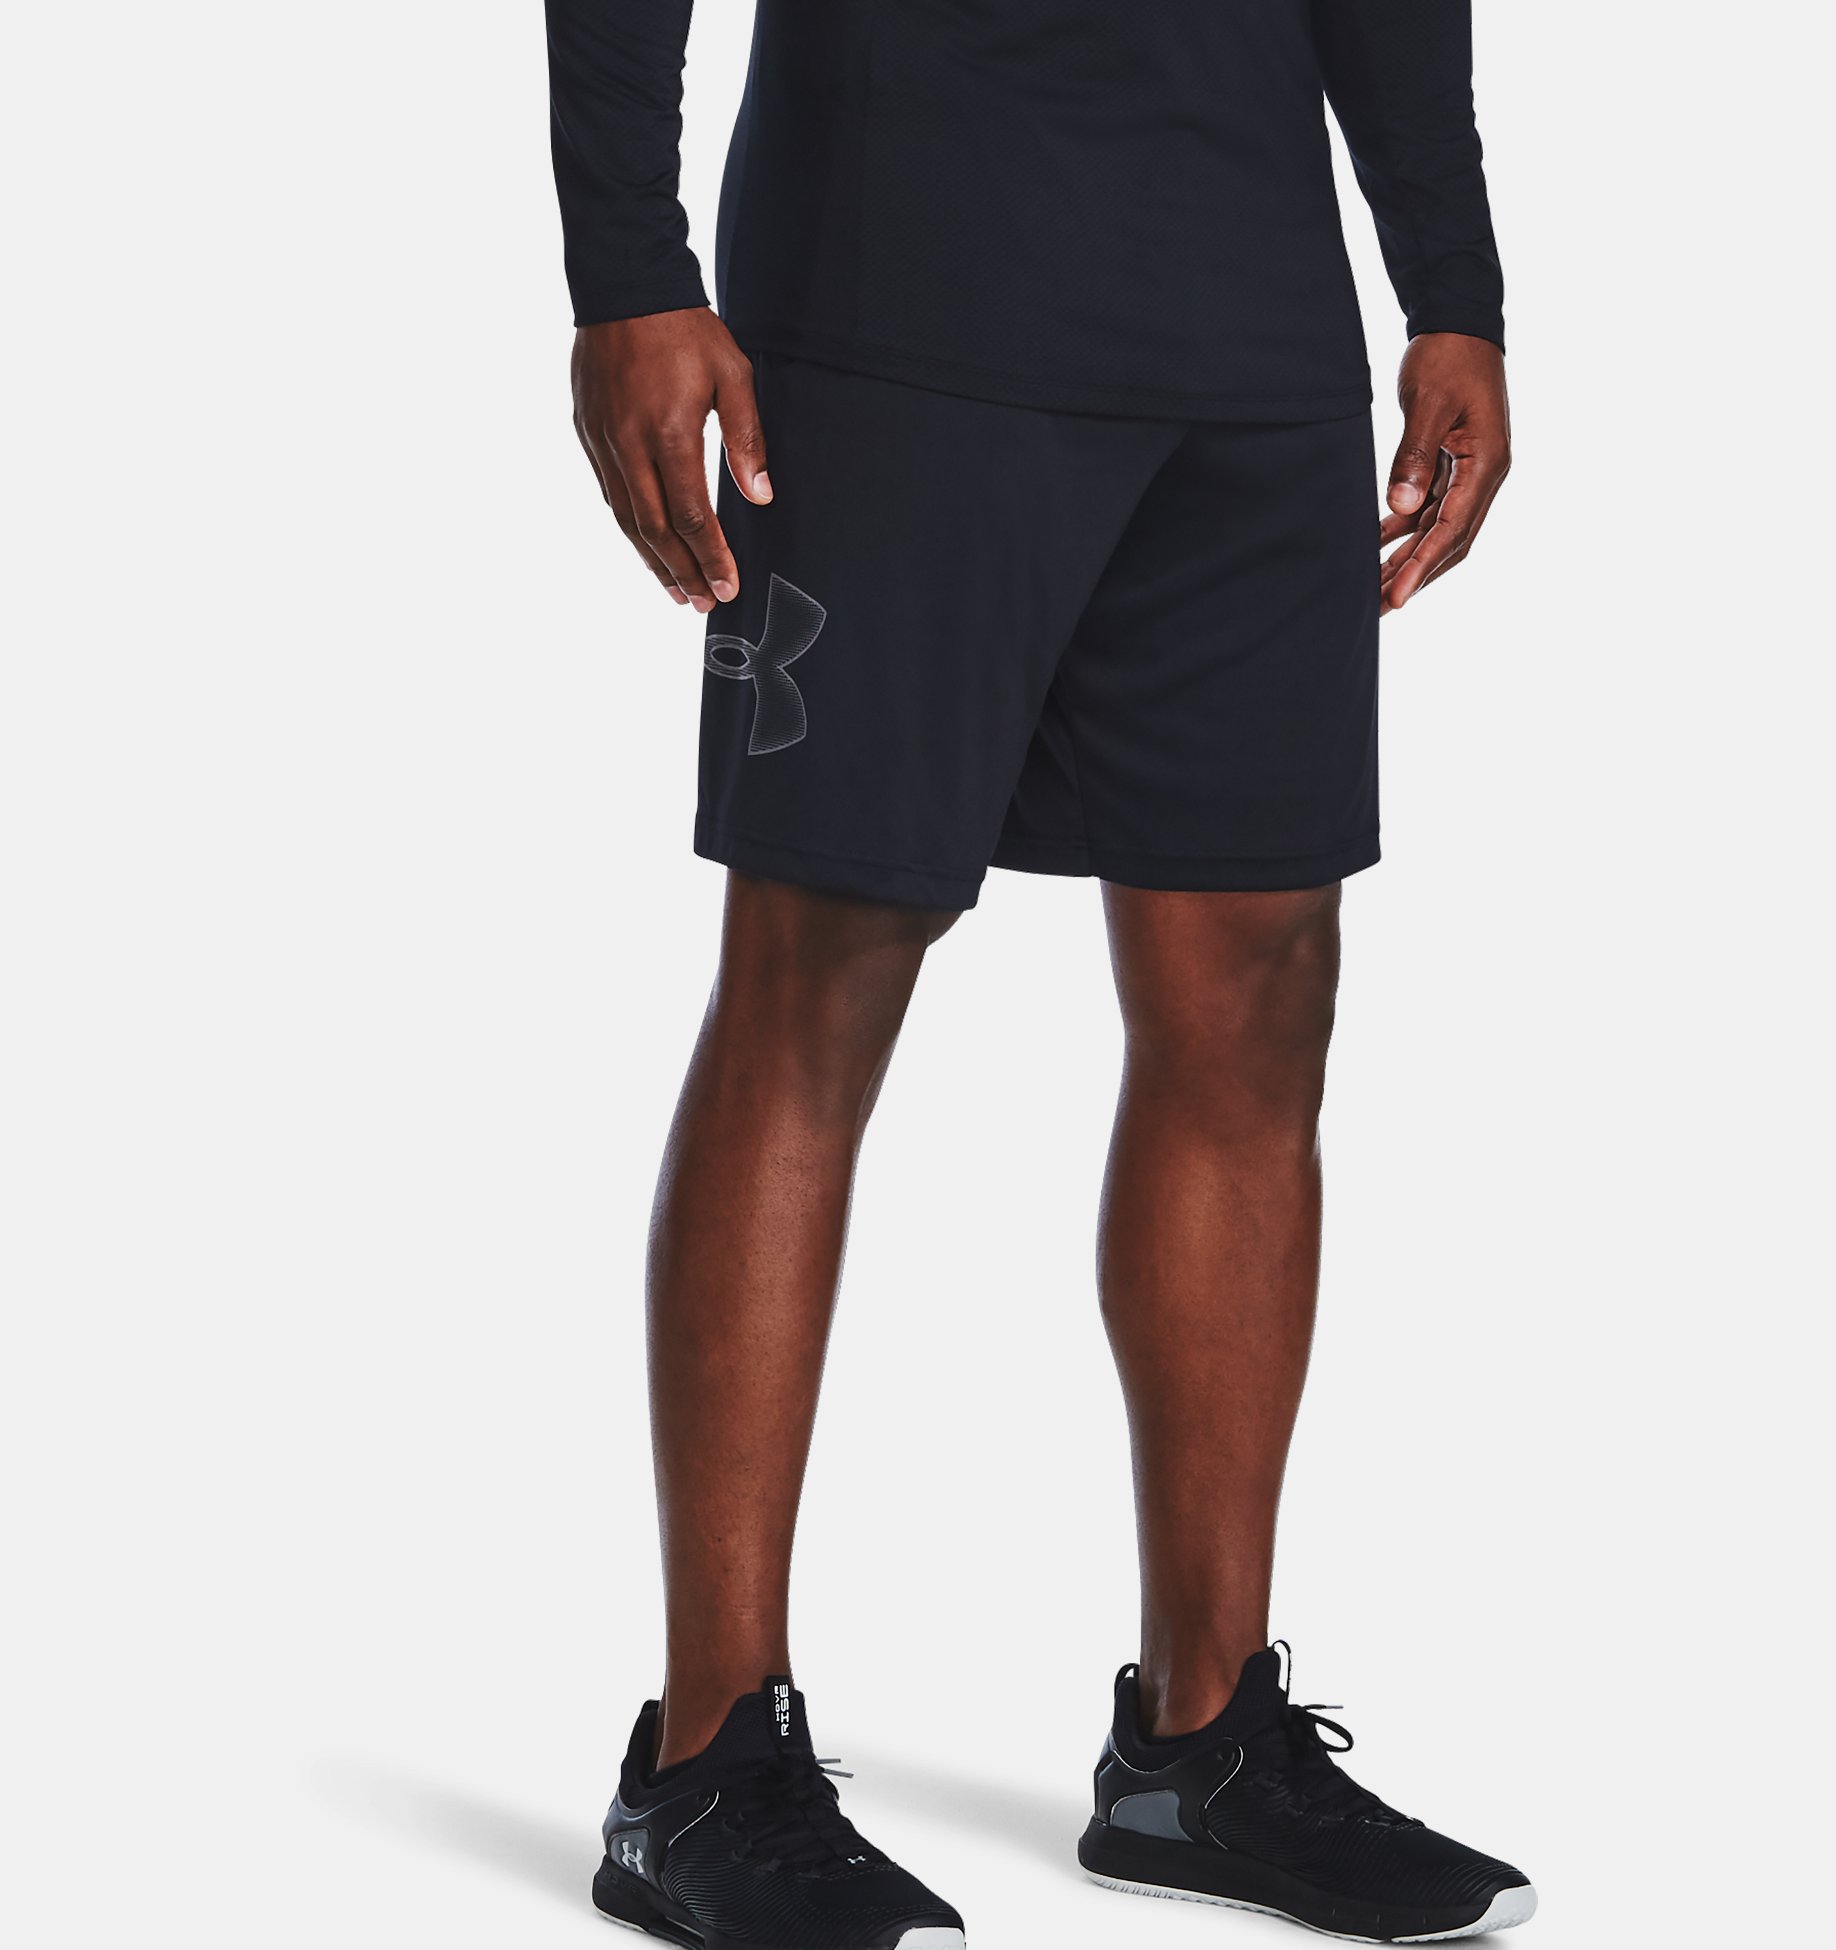 Running Shorts Made of Breathable Material Workout Shorts with Ultra-light Design Men Under Armour Tech Graphic Short 